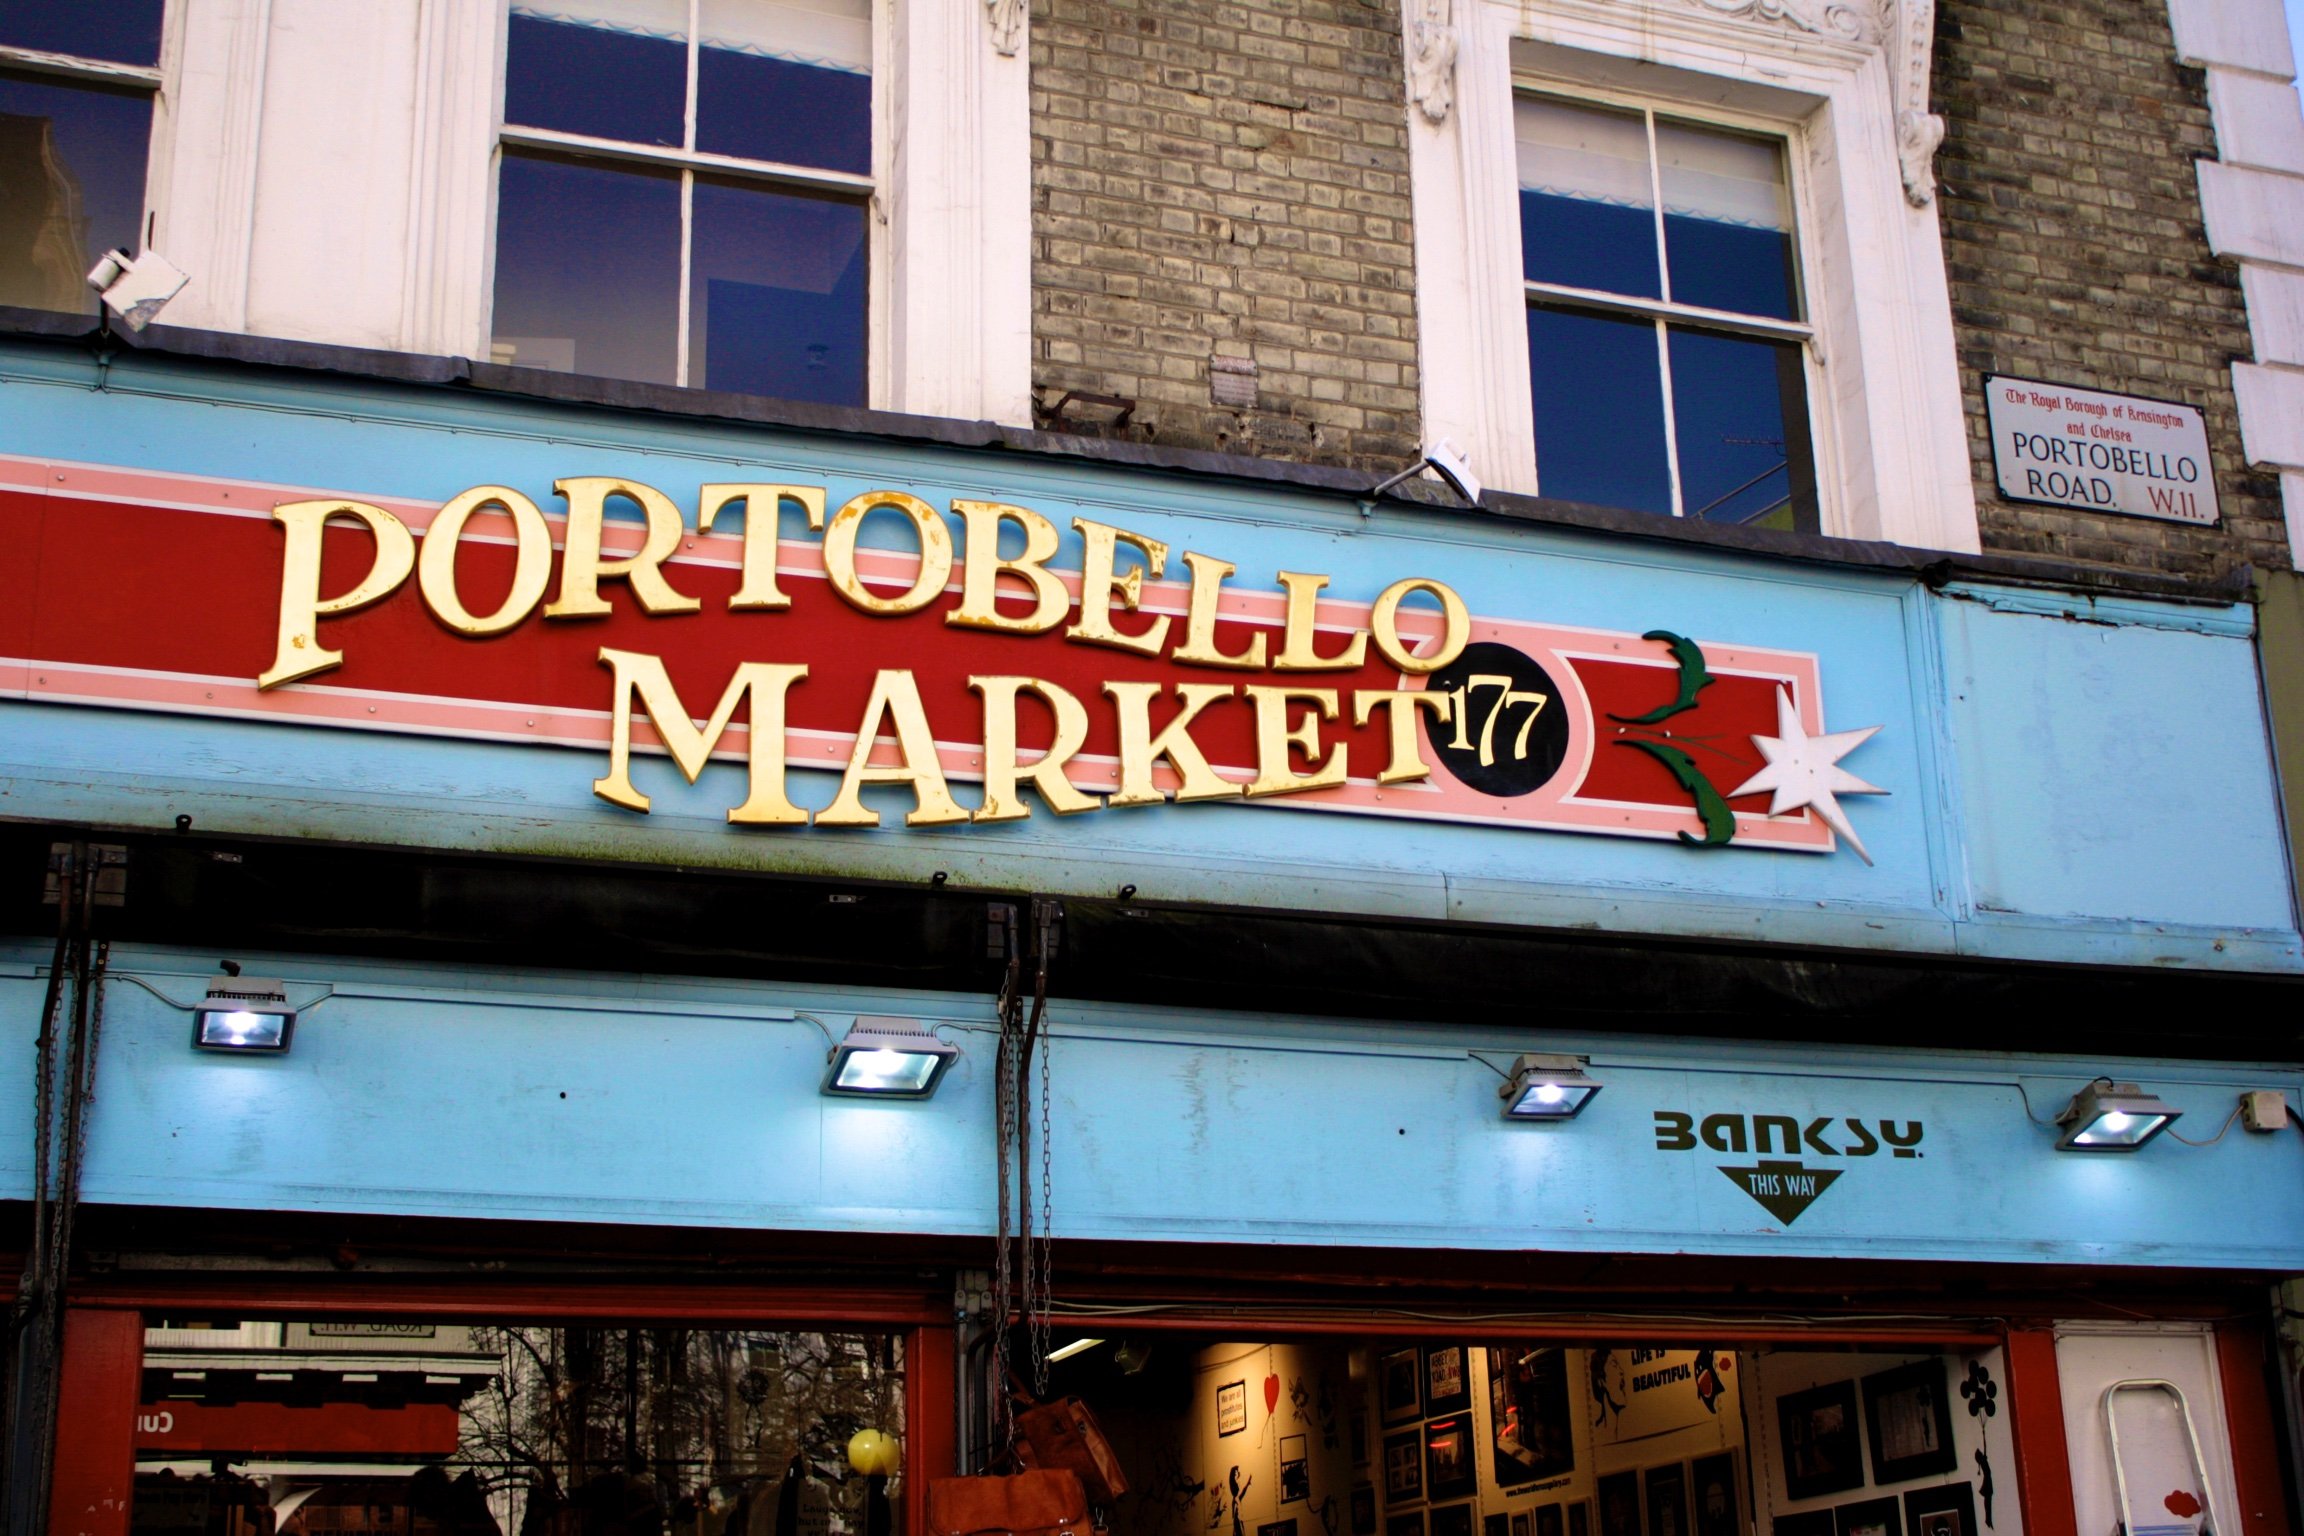 Portobello Market sign in red, blue, pink and gold